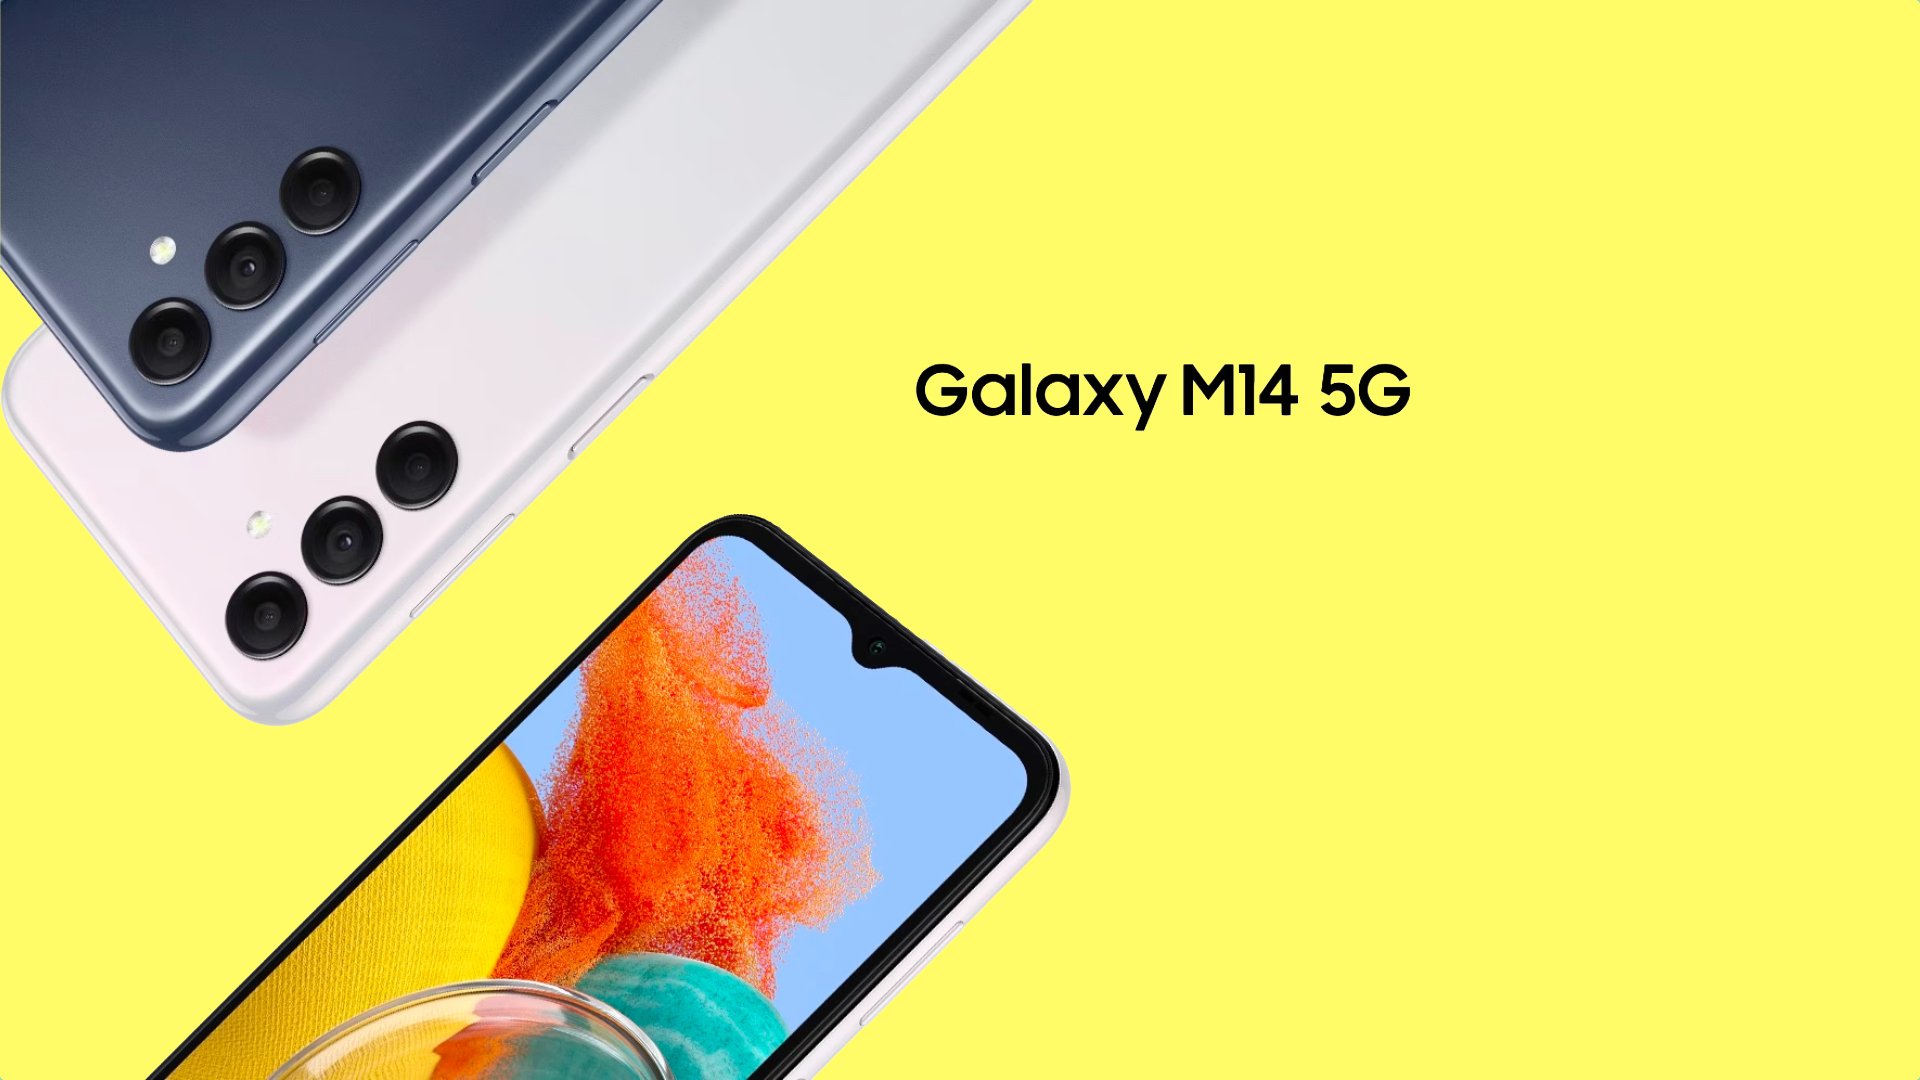 Samsung Galaxy M14 5G launched with Exynos 1330 and massive battery - SamMobile